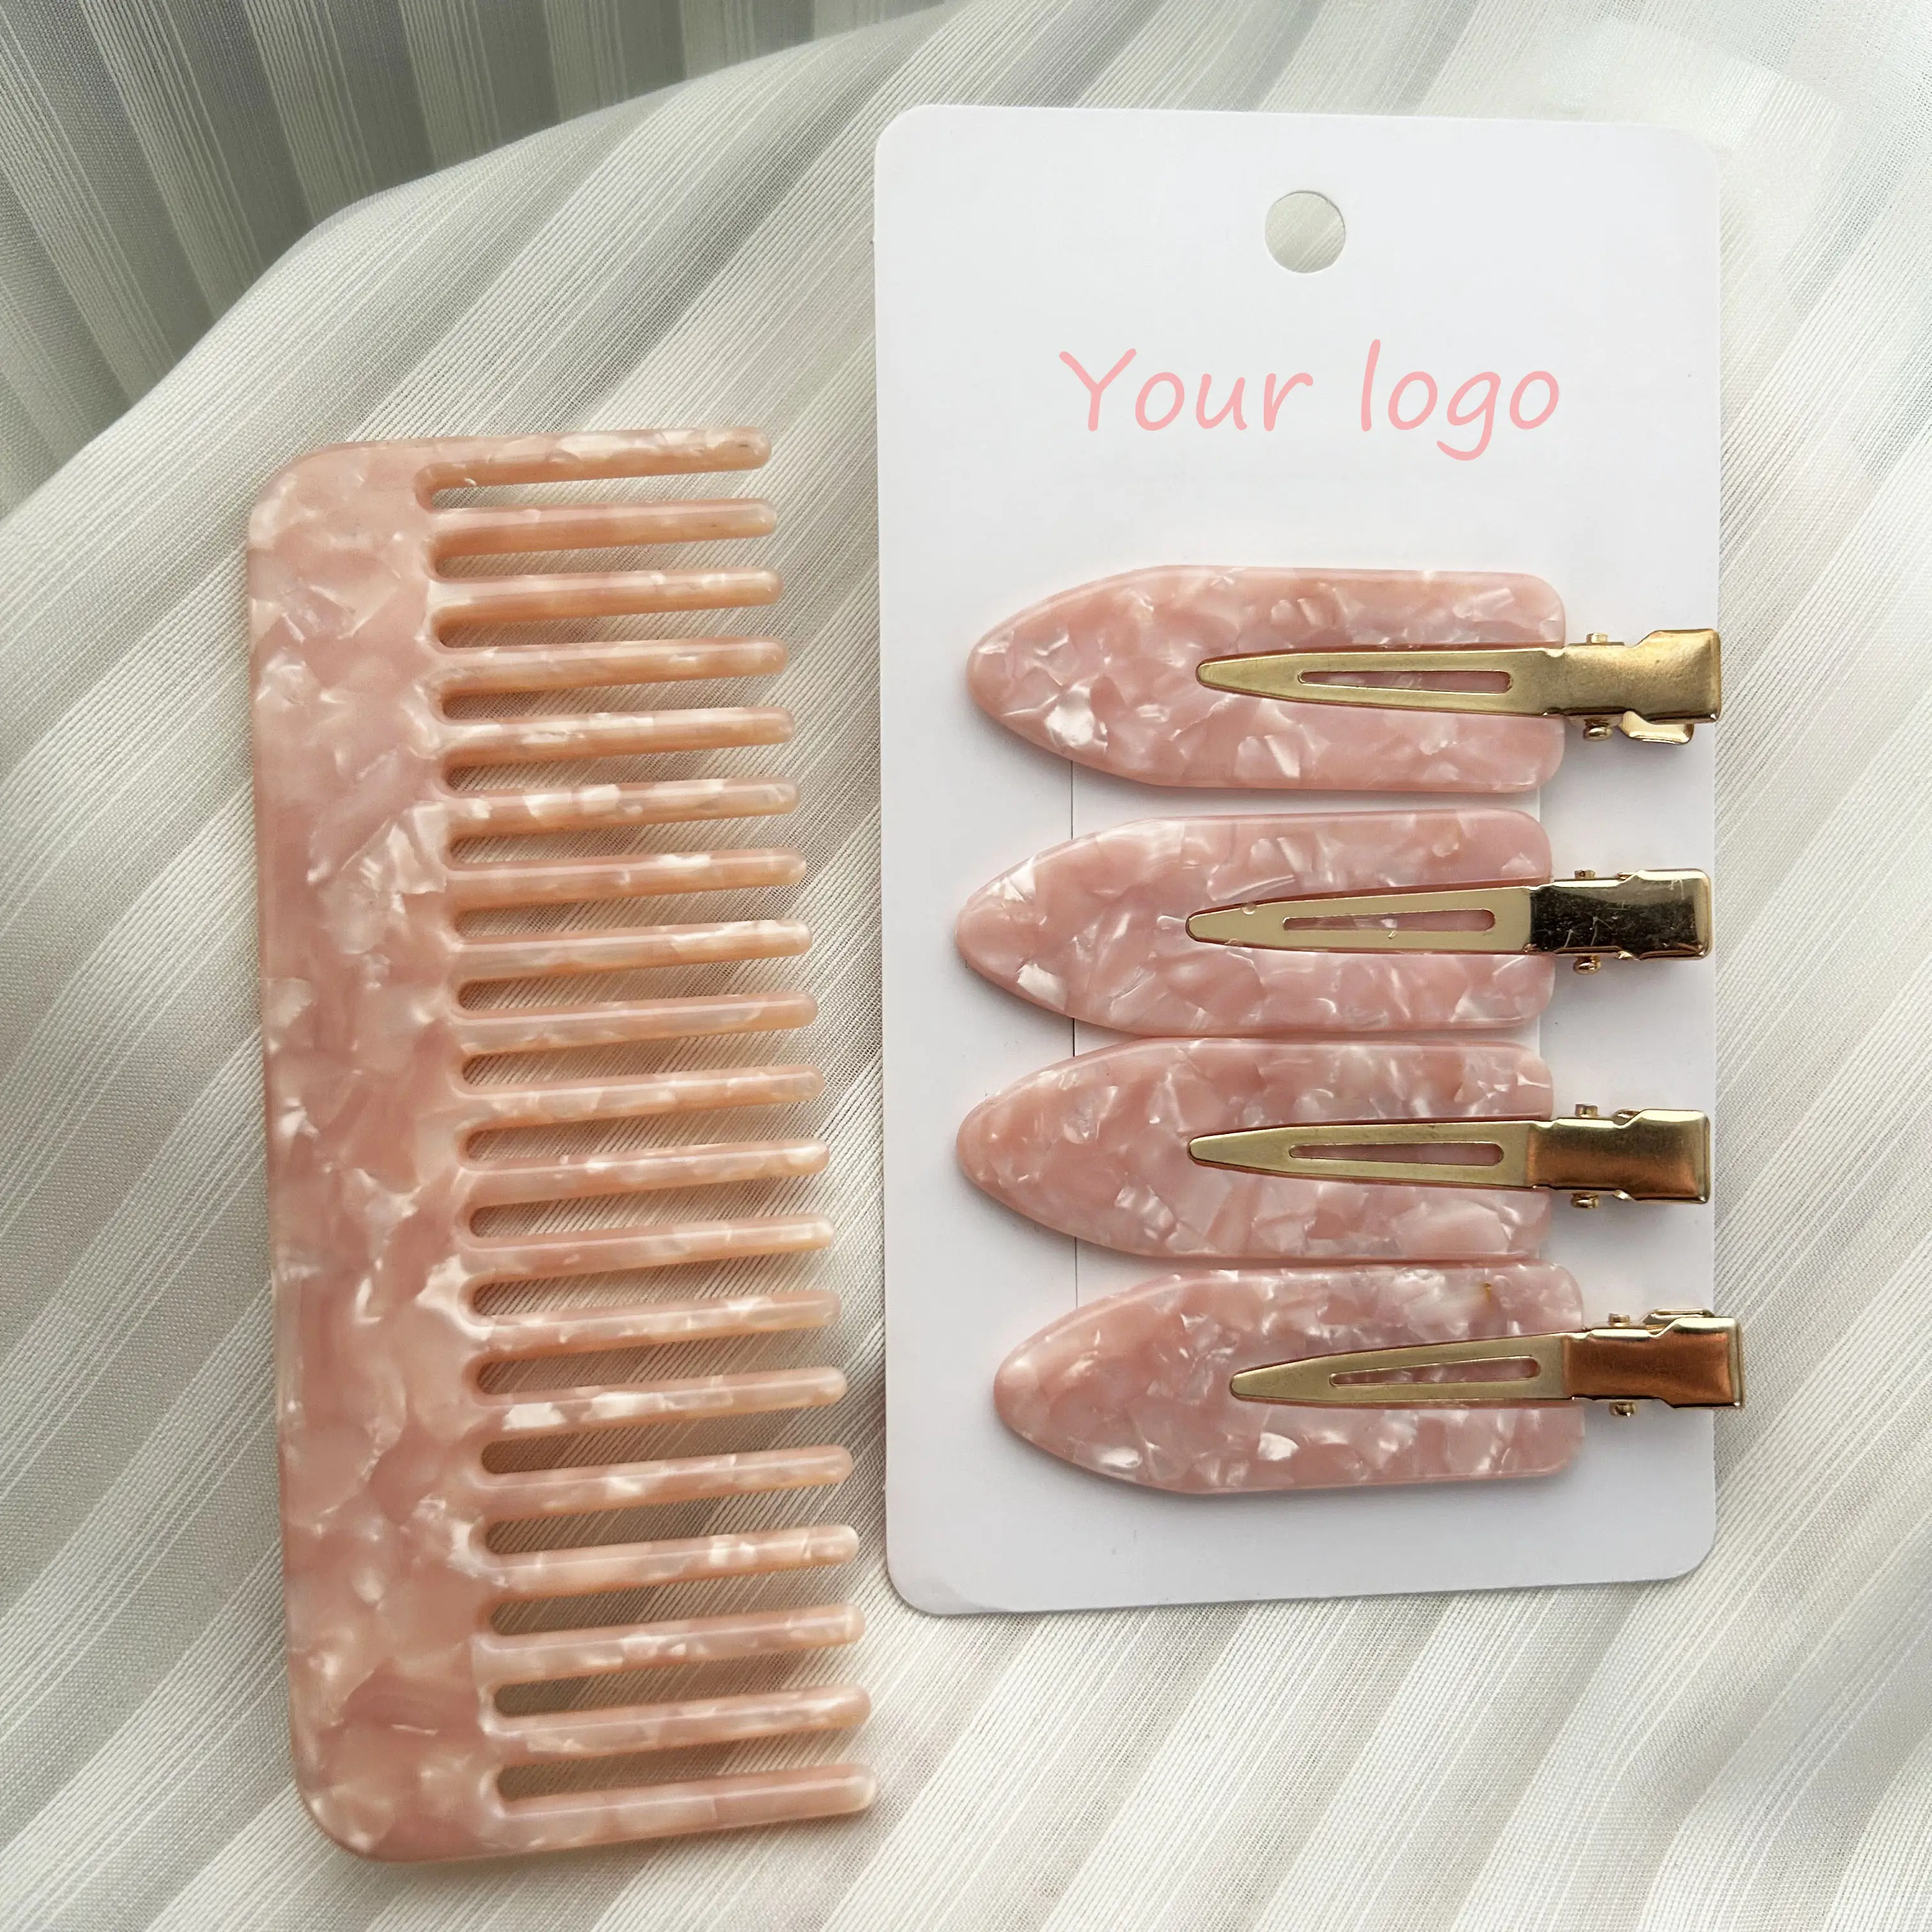 SAIYII Custom Logo Summer Color Wide Tooth Hair Comb Cellulose Acetate Eco Mini Hair Clip Comb Set For Girls And Women